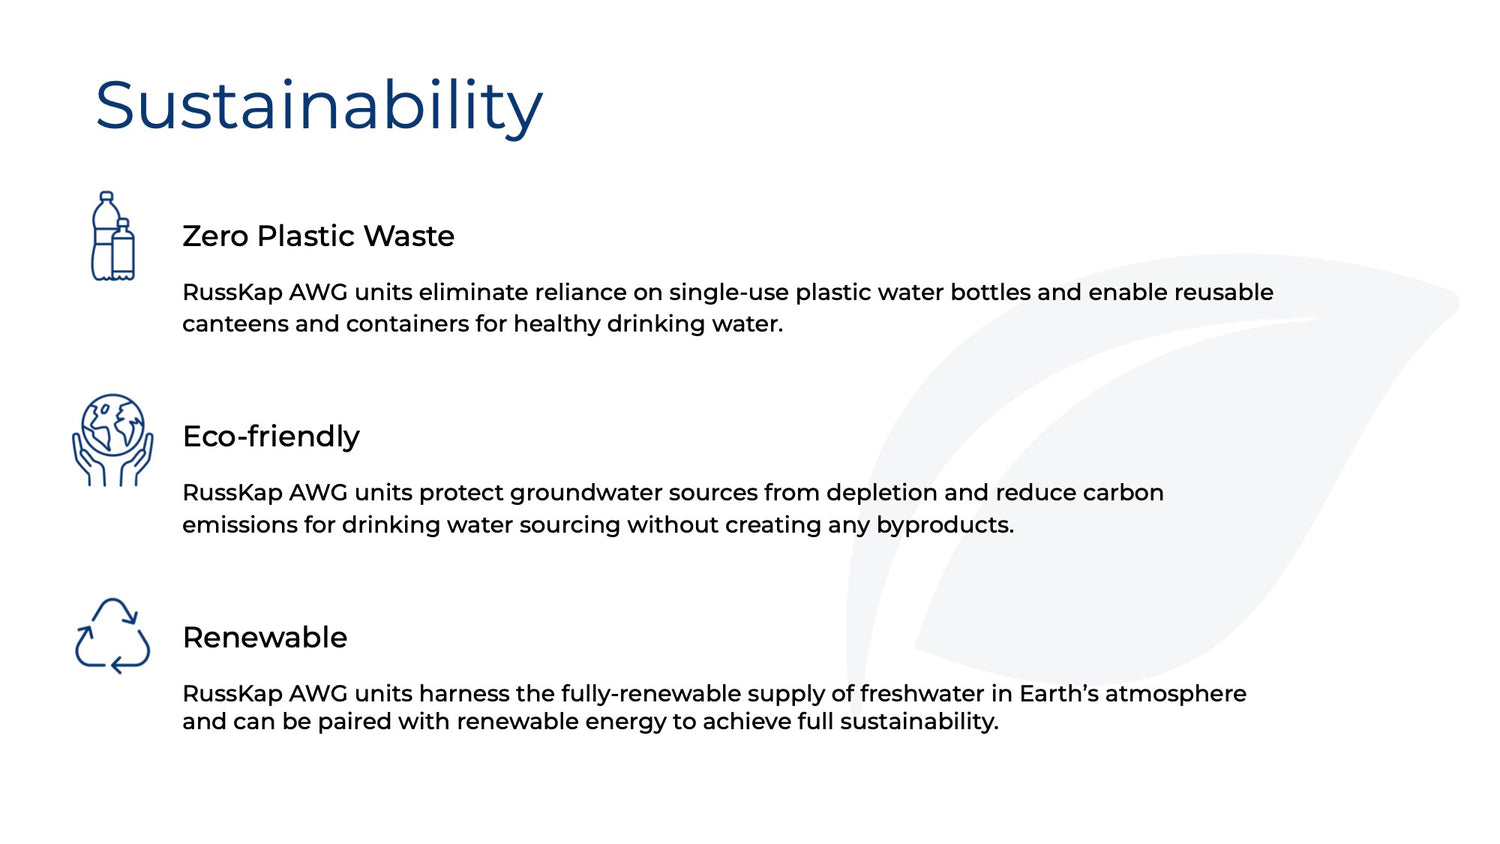 RussKap AWG Sustainability: proactive solution for plastic pollution, mitigate environmental impact, harness fully-renewable supply of fresh water.